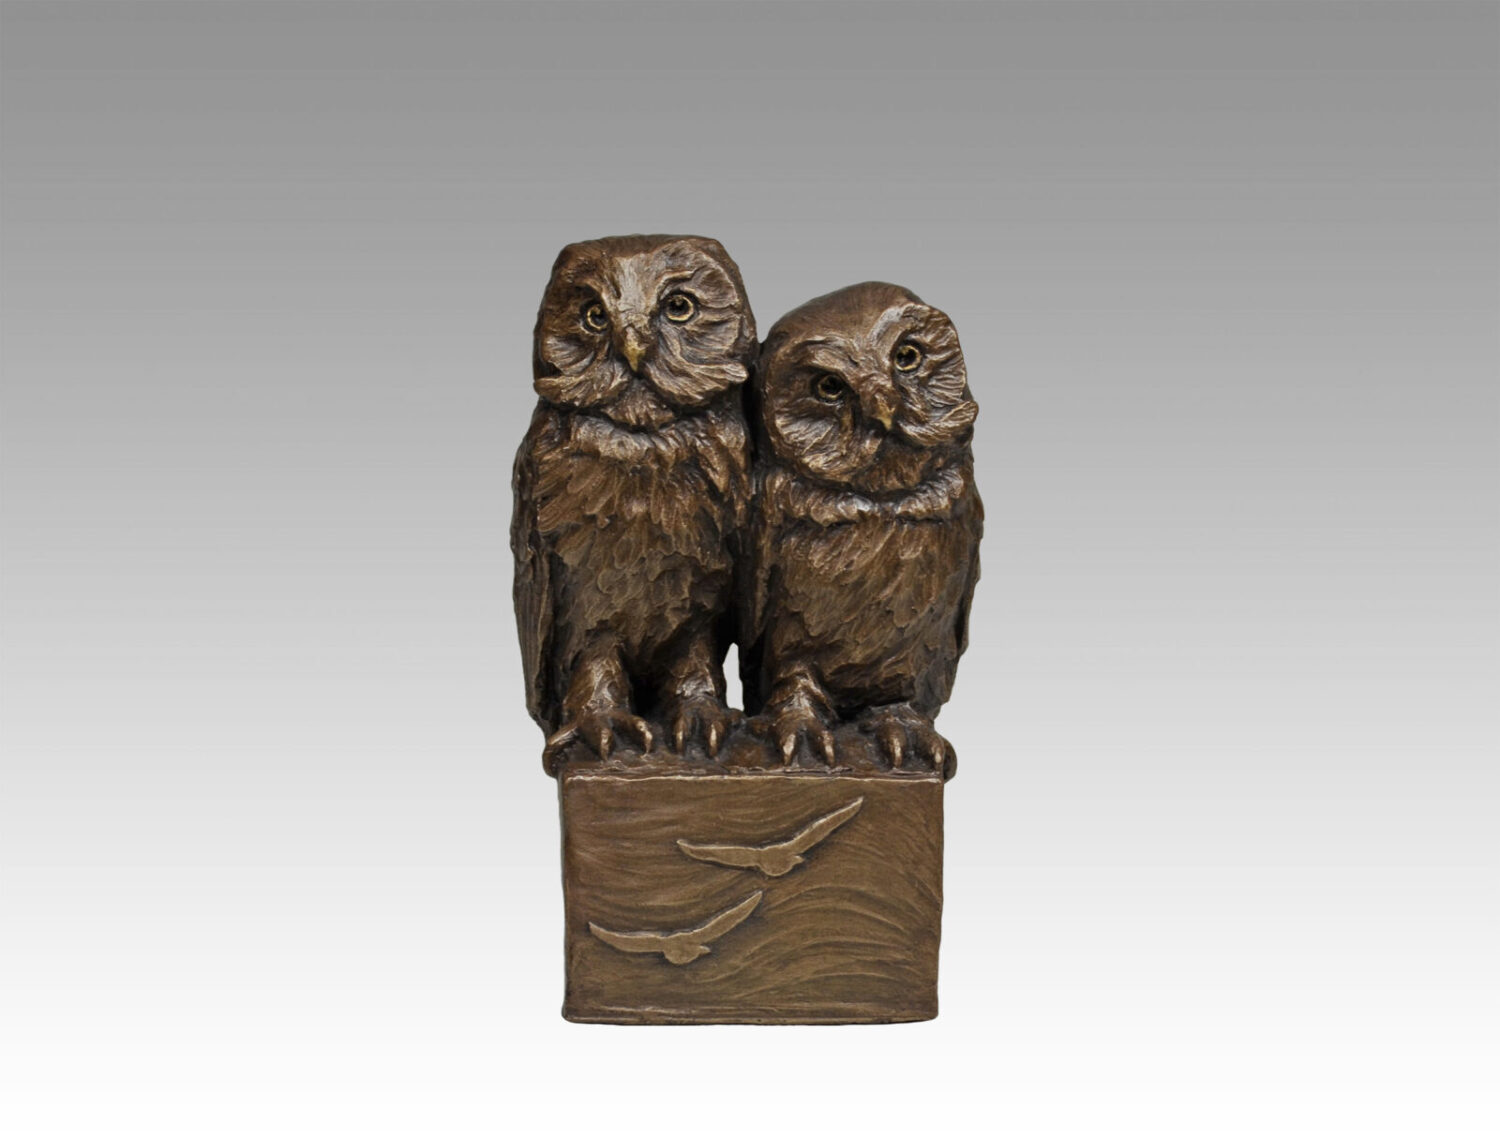 Gallery, Saw-Whet Duet, $325 CAD, Metal Infused, 9 ½” H, Edition 60, Wildlife Sculpture of Two Saw-Whet Owls, Sculptor Tyler Fauvelle